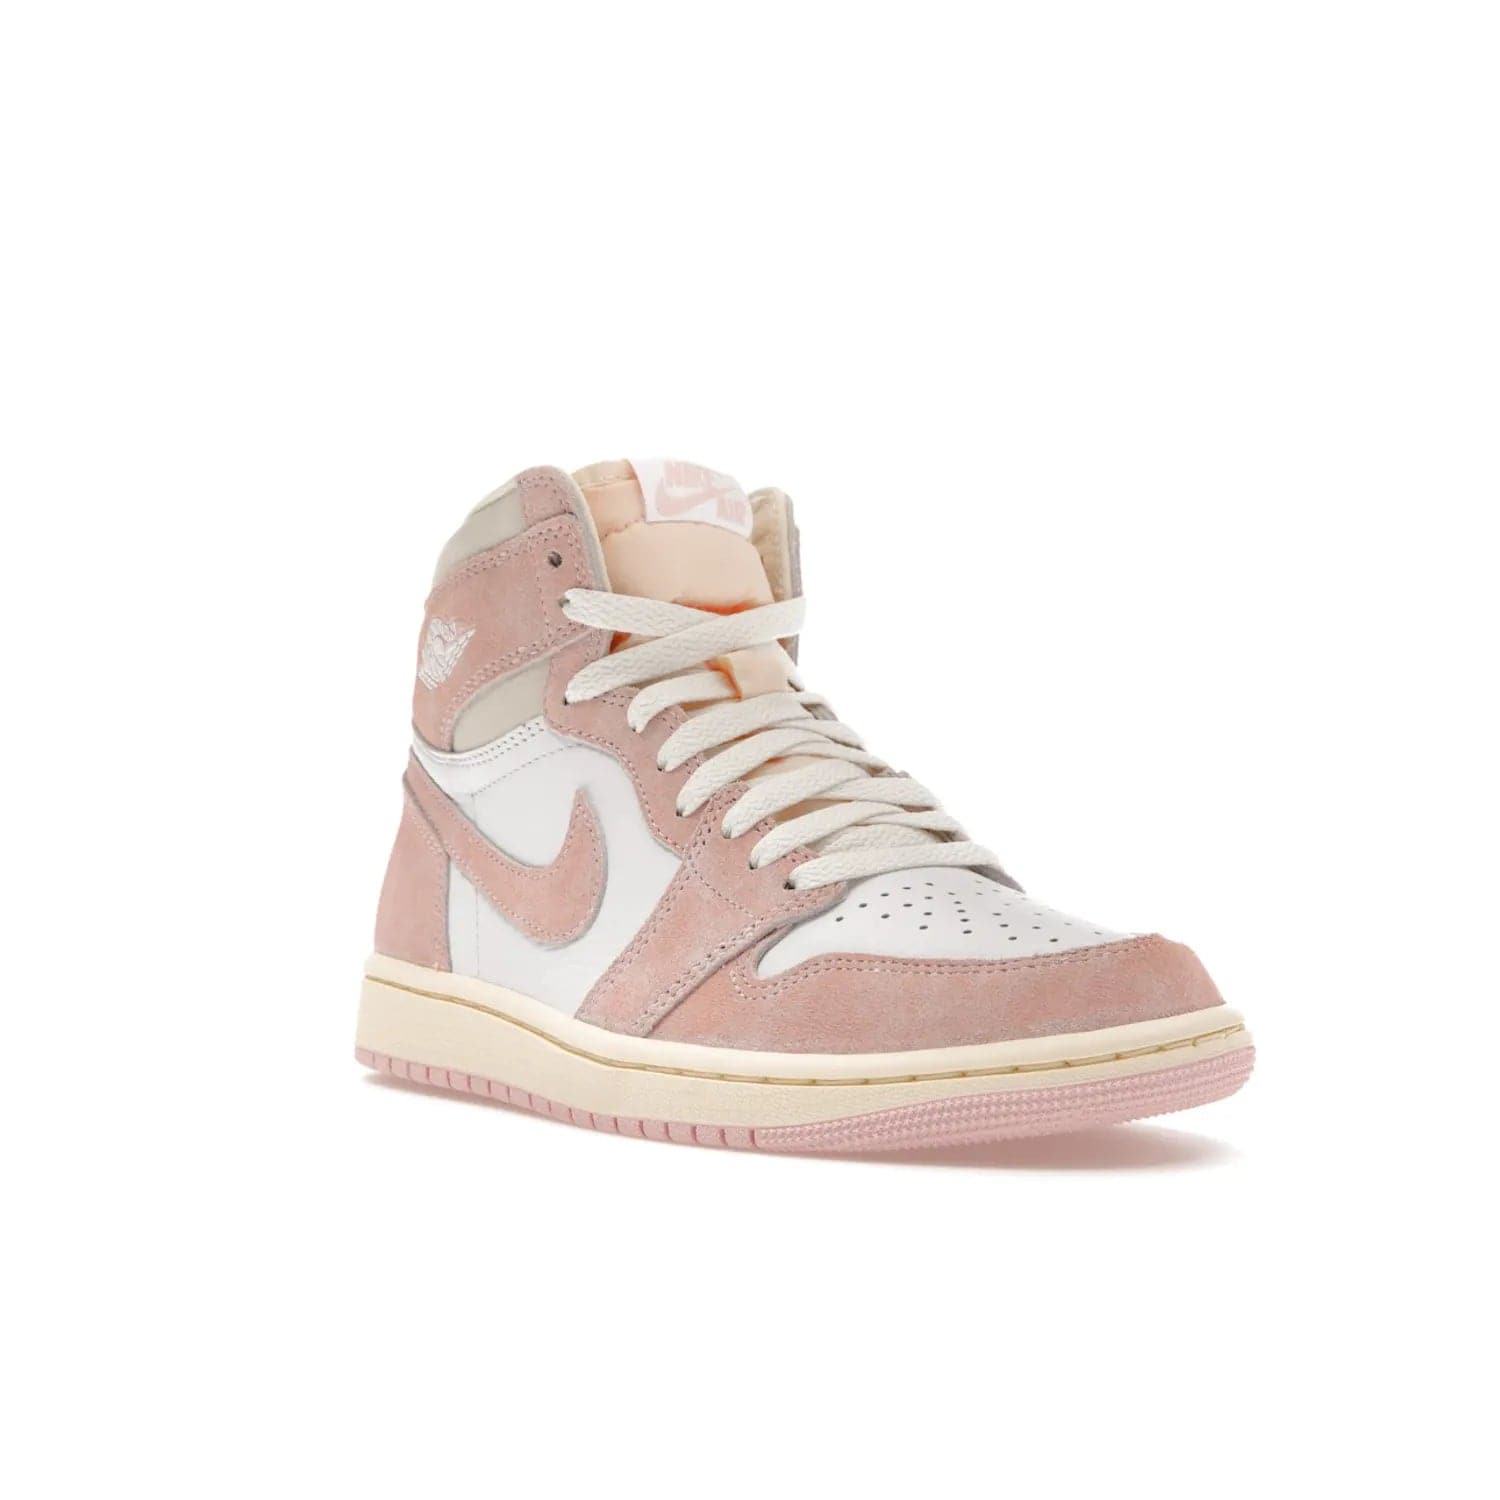 Jordan 1 Retro High OG Washed Pink (Women's) - Image 6 - Only at www.BallersClubKickz.com - Iconic Air Jordan 1 Retro High OG for women with unique pink suede and white leather uppers. Get the timeless look on April 22, 2023.